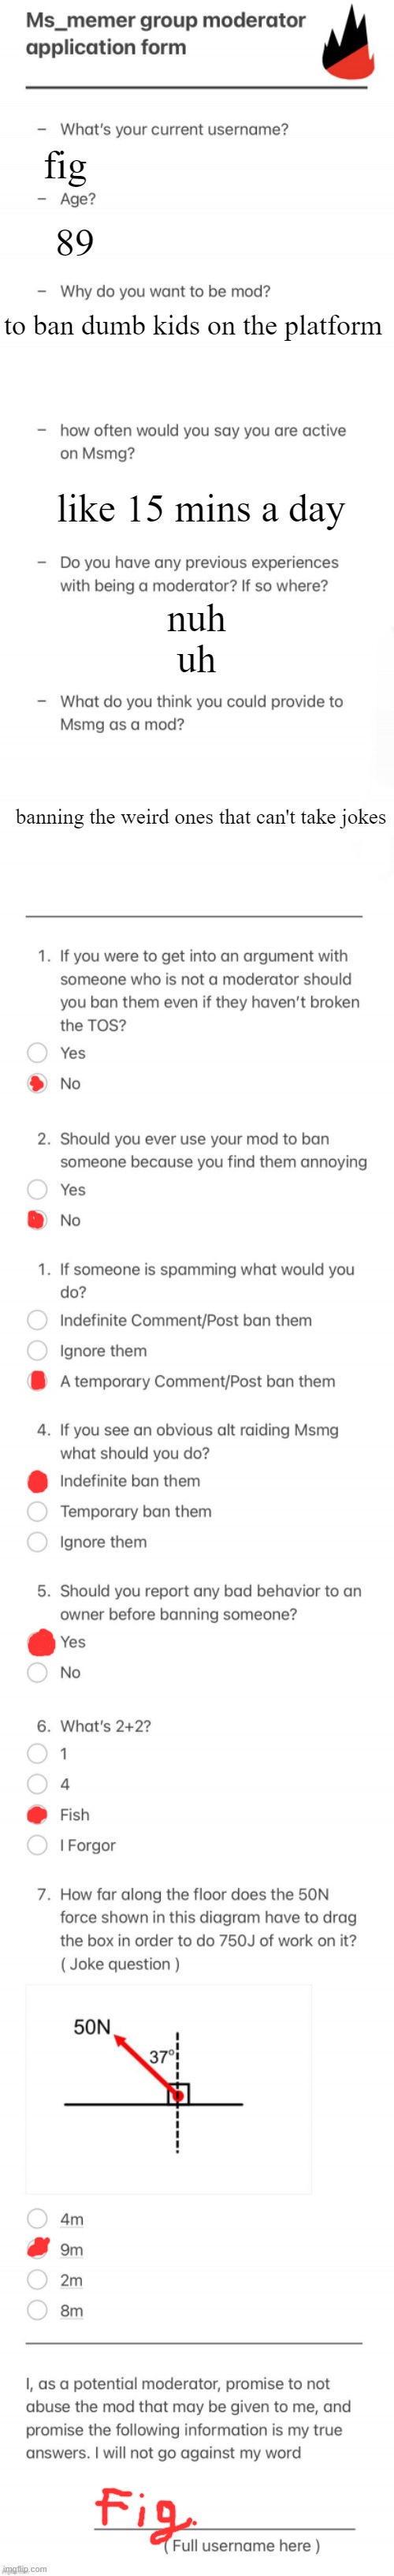 UPDATED MSMG MOD FORM | fig; 89; to ban dumb kids on the platform; like 15 mins a day; nuh uh; banning the weird ones that can't take jokes | image tagged in updated msmg mod form | made w/ Imgflip meme maker